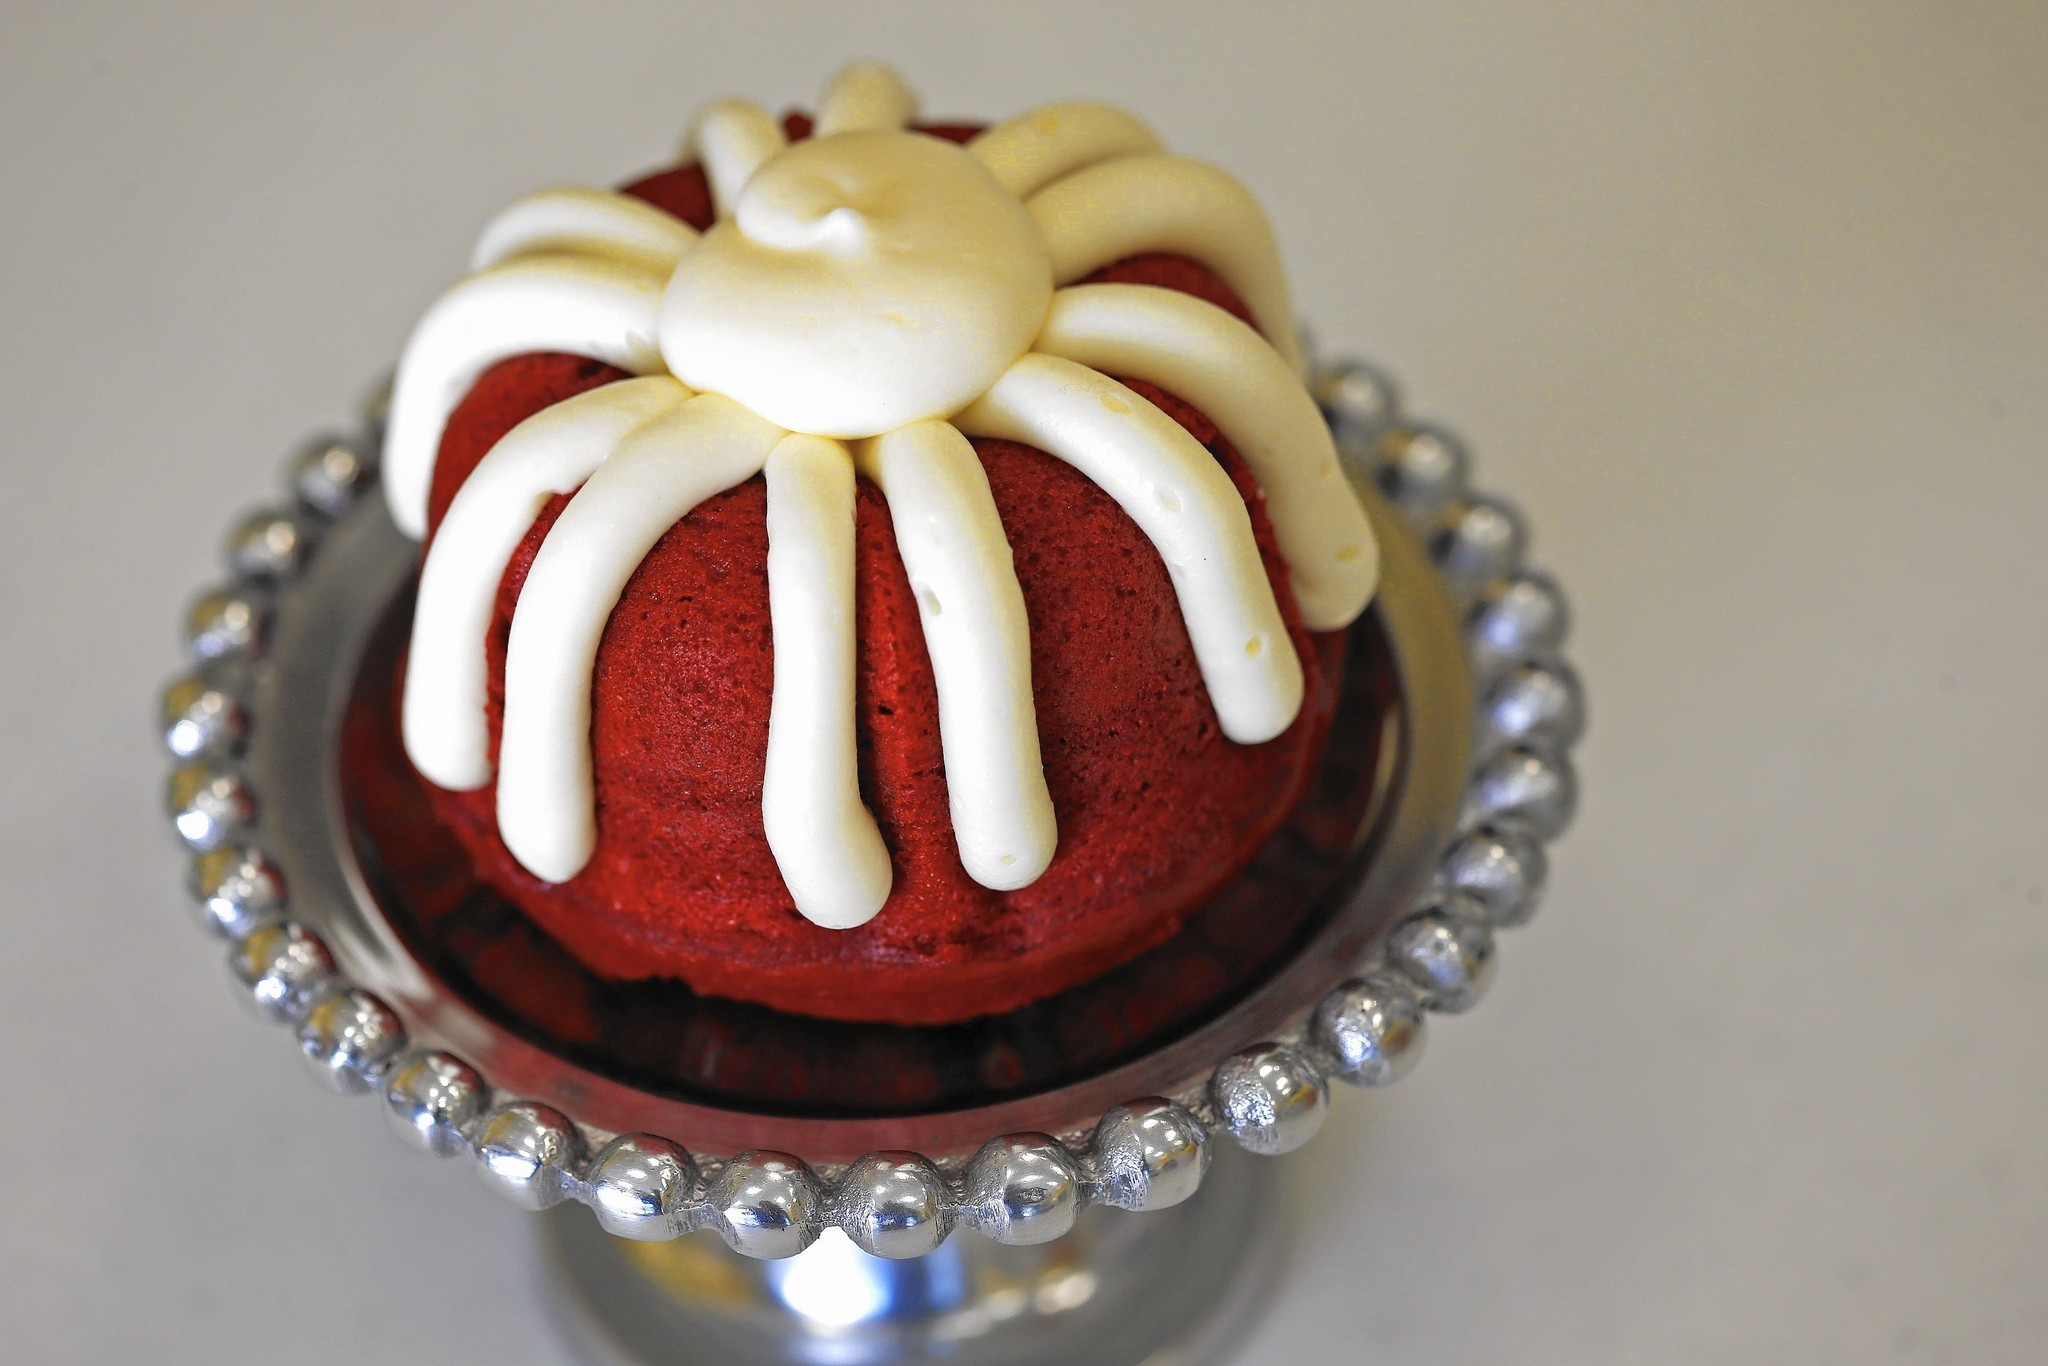 Nothing Bundt Cakes nothing but pleasure for former CPA couple